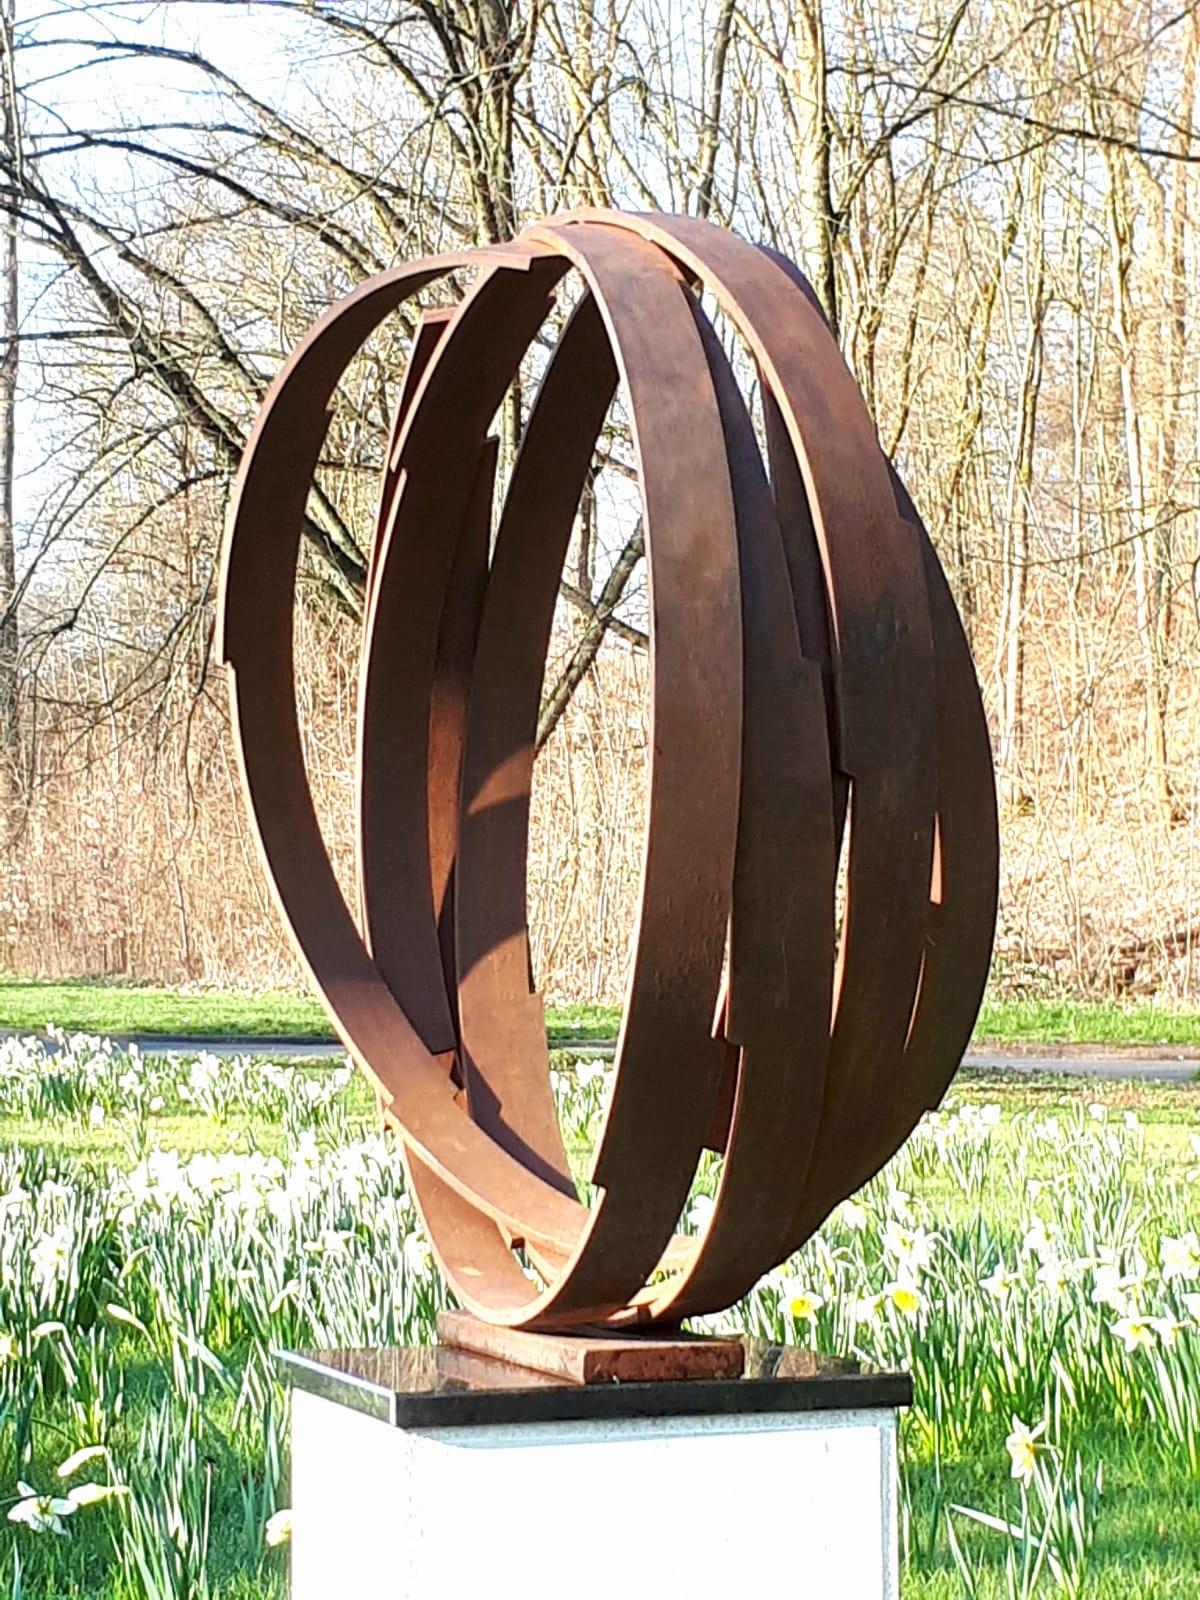 Large Orbit by Kuno Vollet - Contemporary Rusted Steel sculpture for Outdoors 7